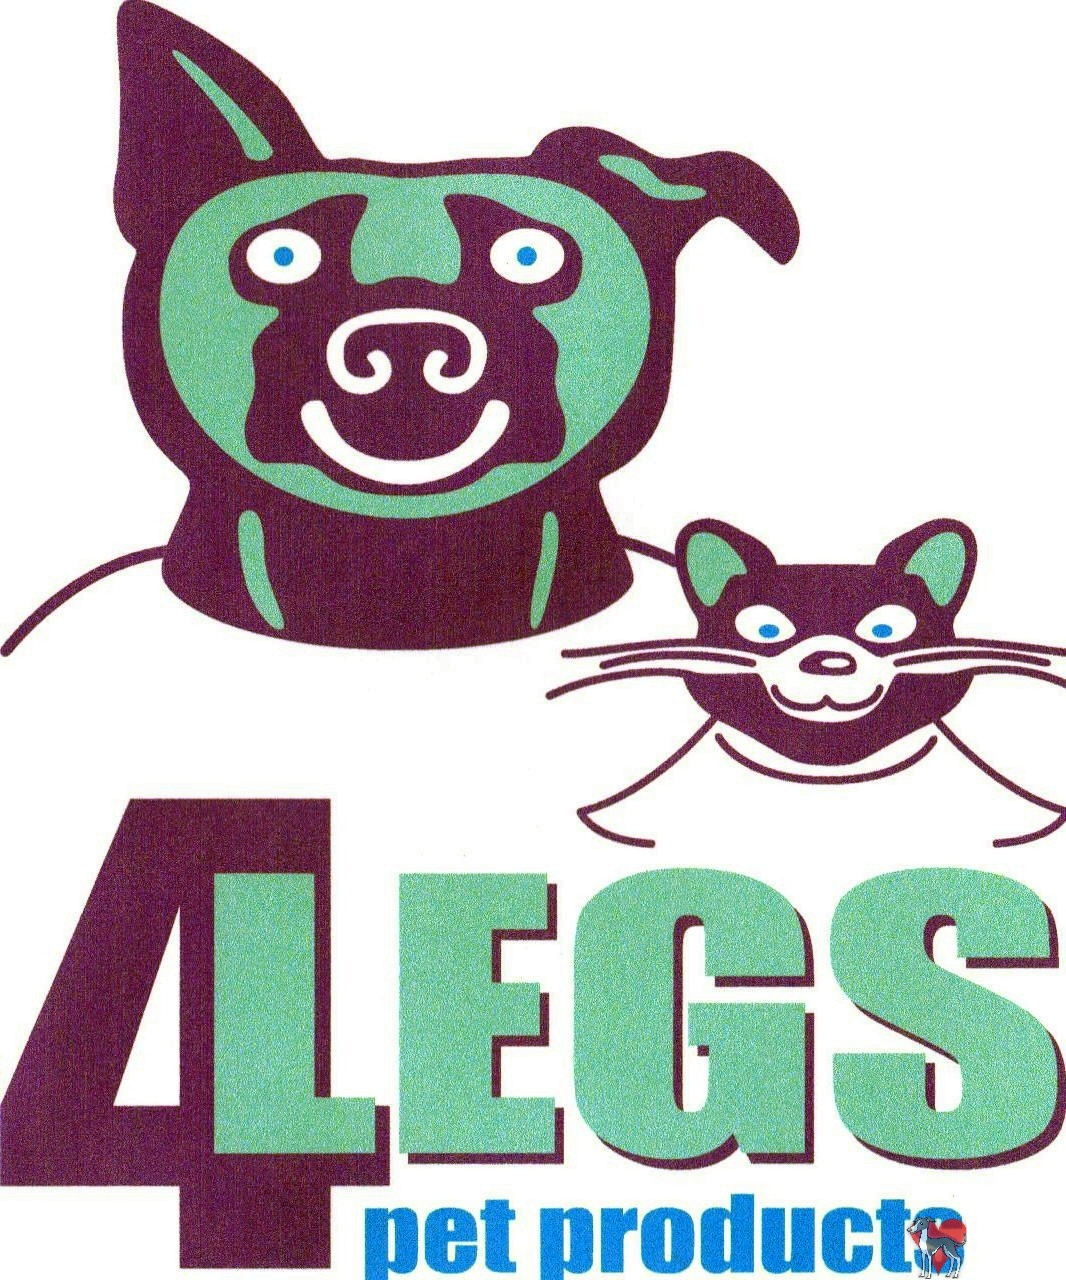 4legs pet products, 4legspetproducts, chicago pet products, pet food delivery, chicago, clark, northside, north, dog, cat, pet, pets, italian greyhound, italian greyhounds, curbside, delivery